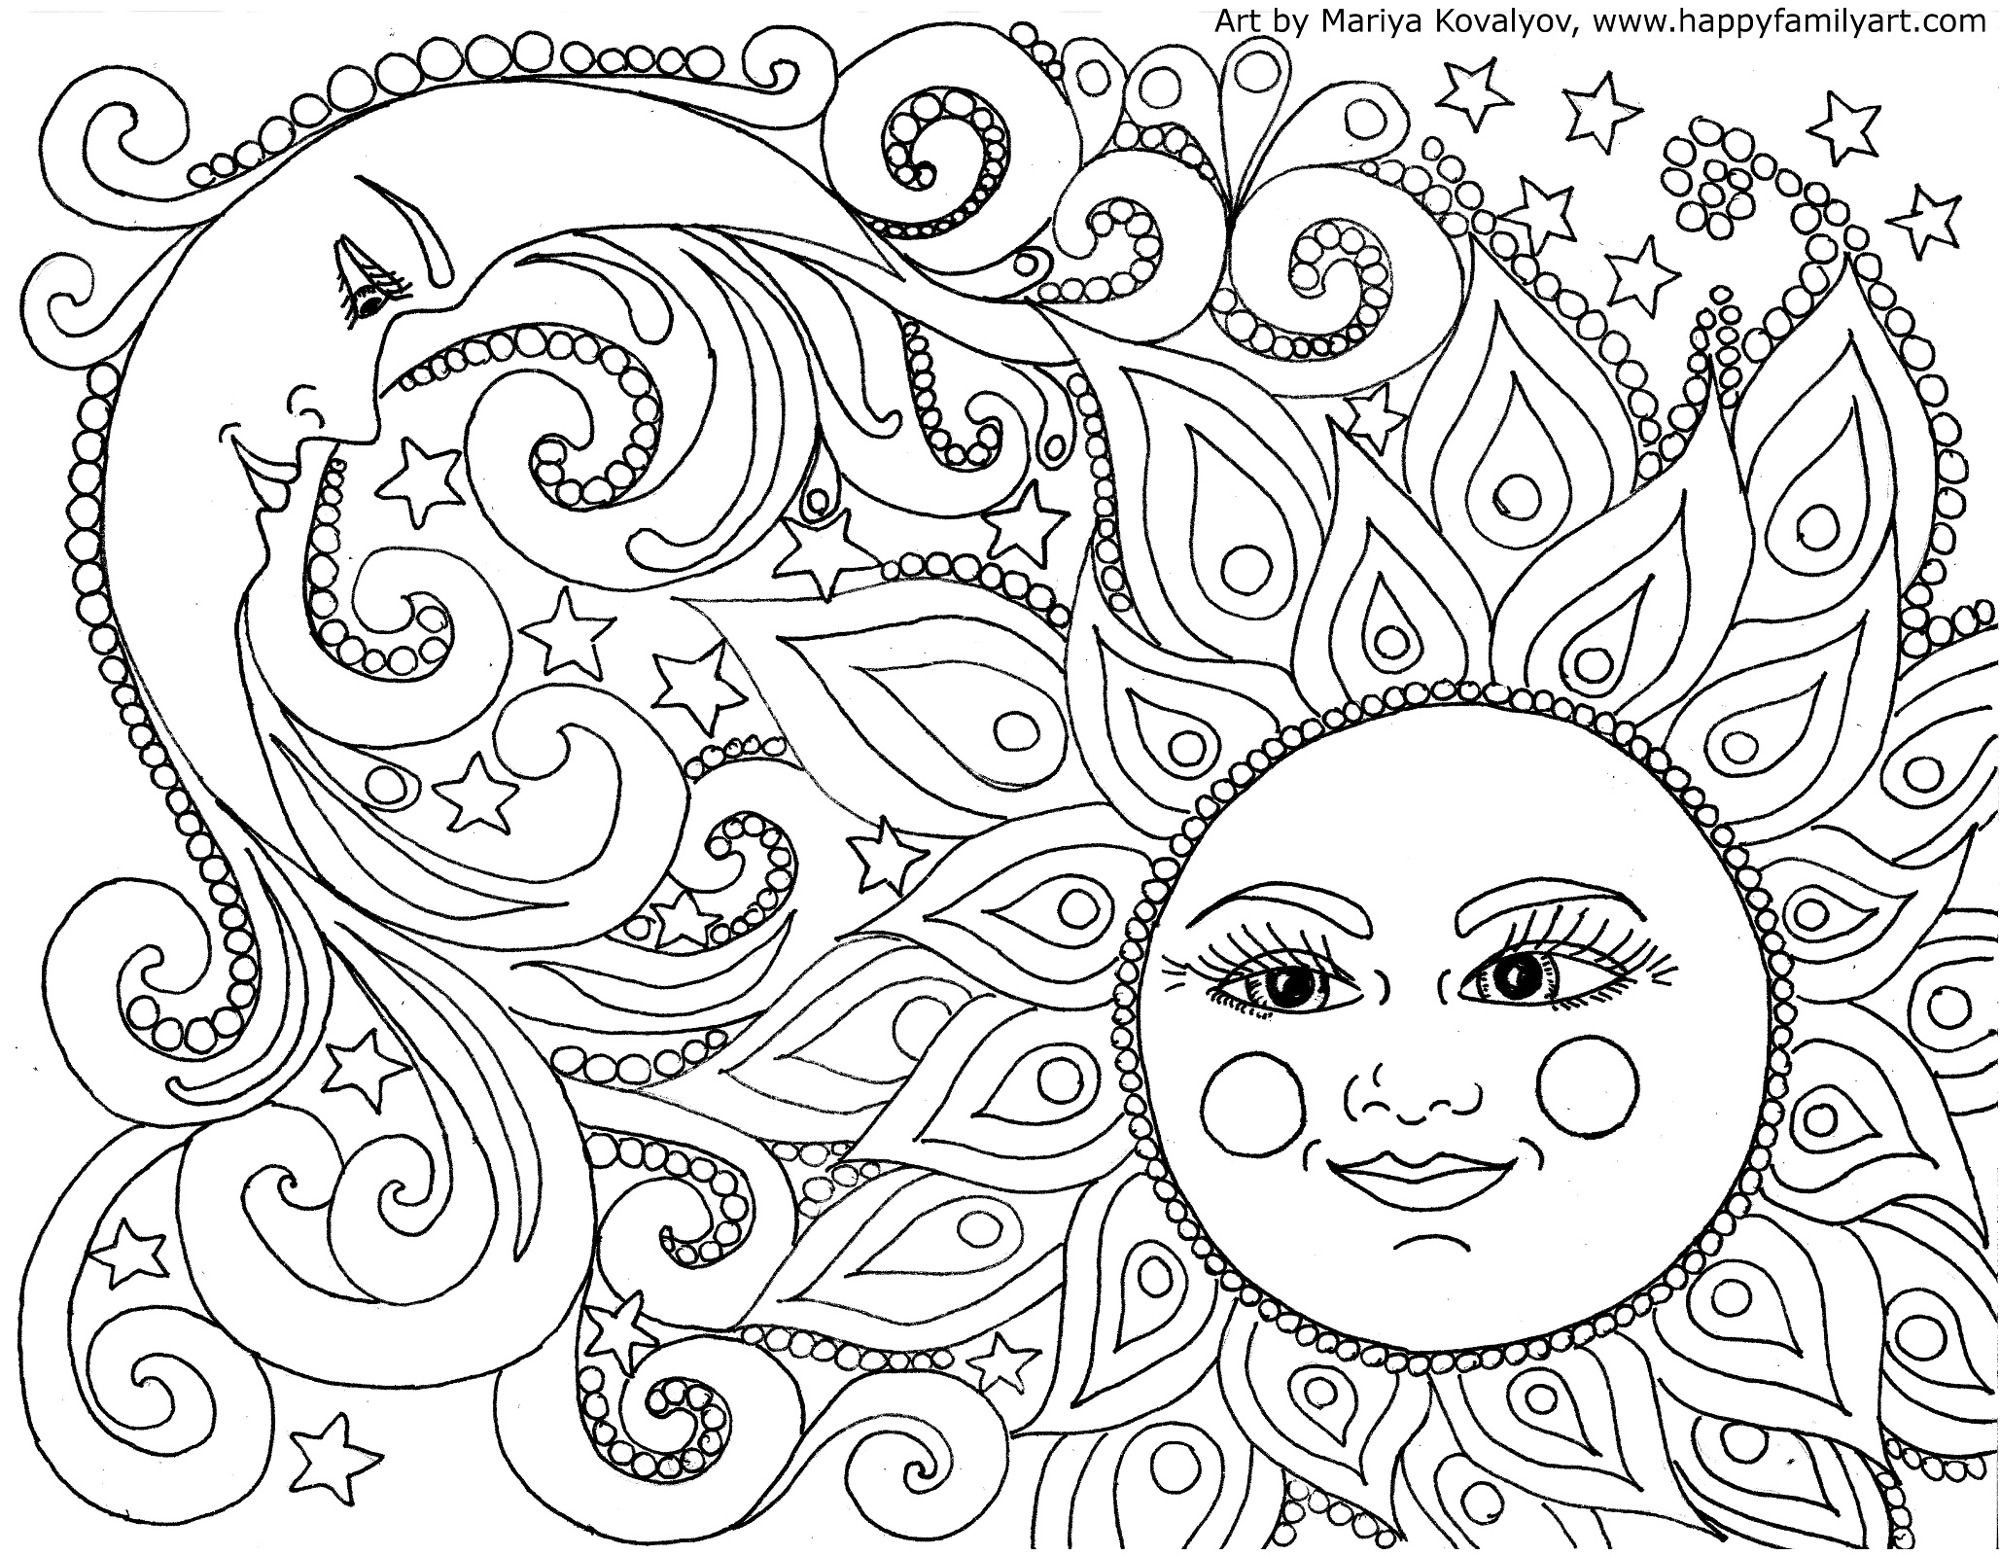 Fun Coloring Pages For Adults
 original and fun coloring pages